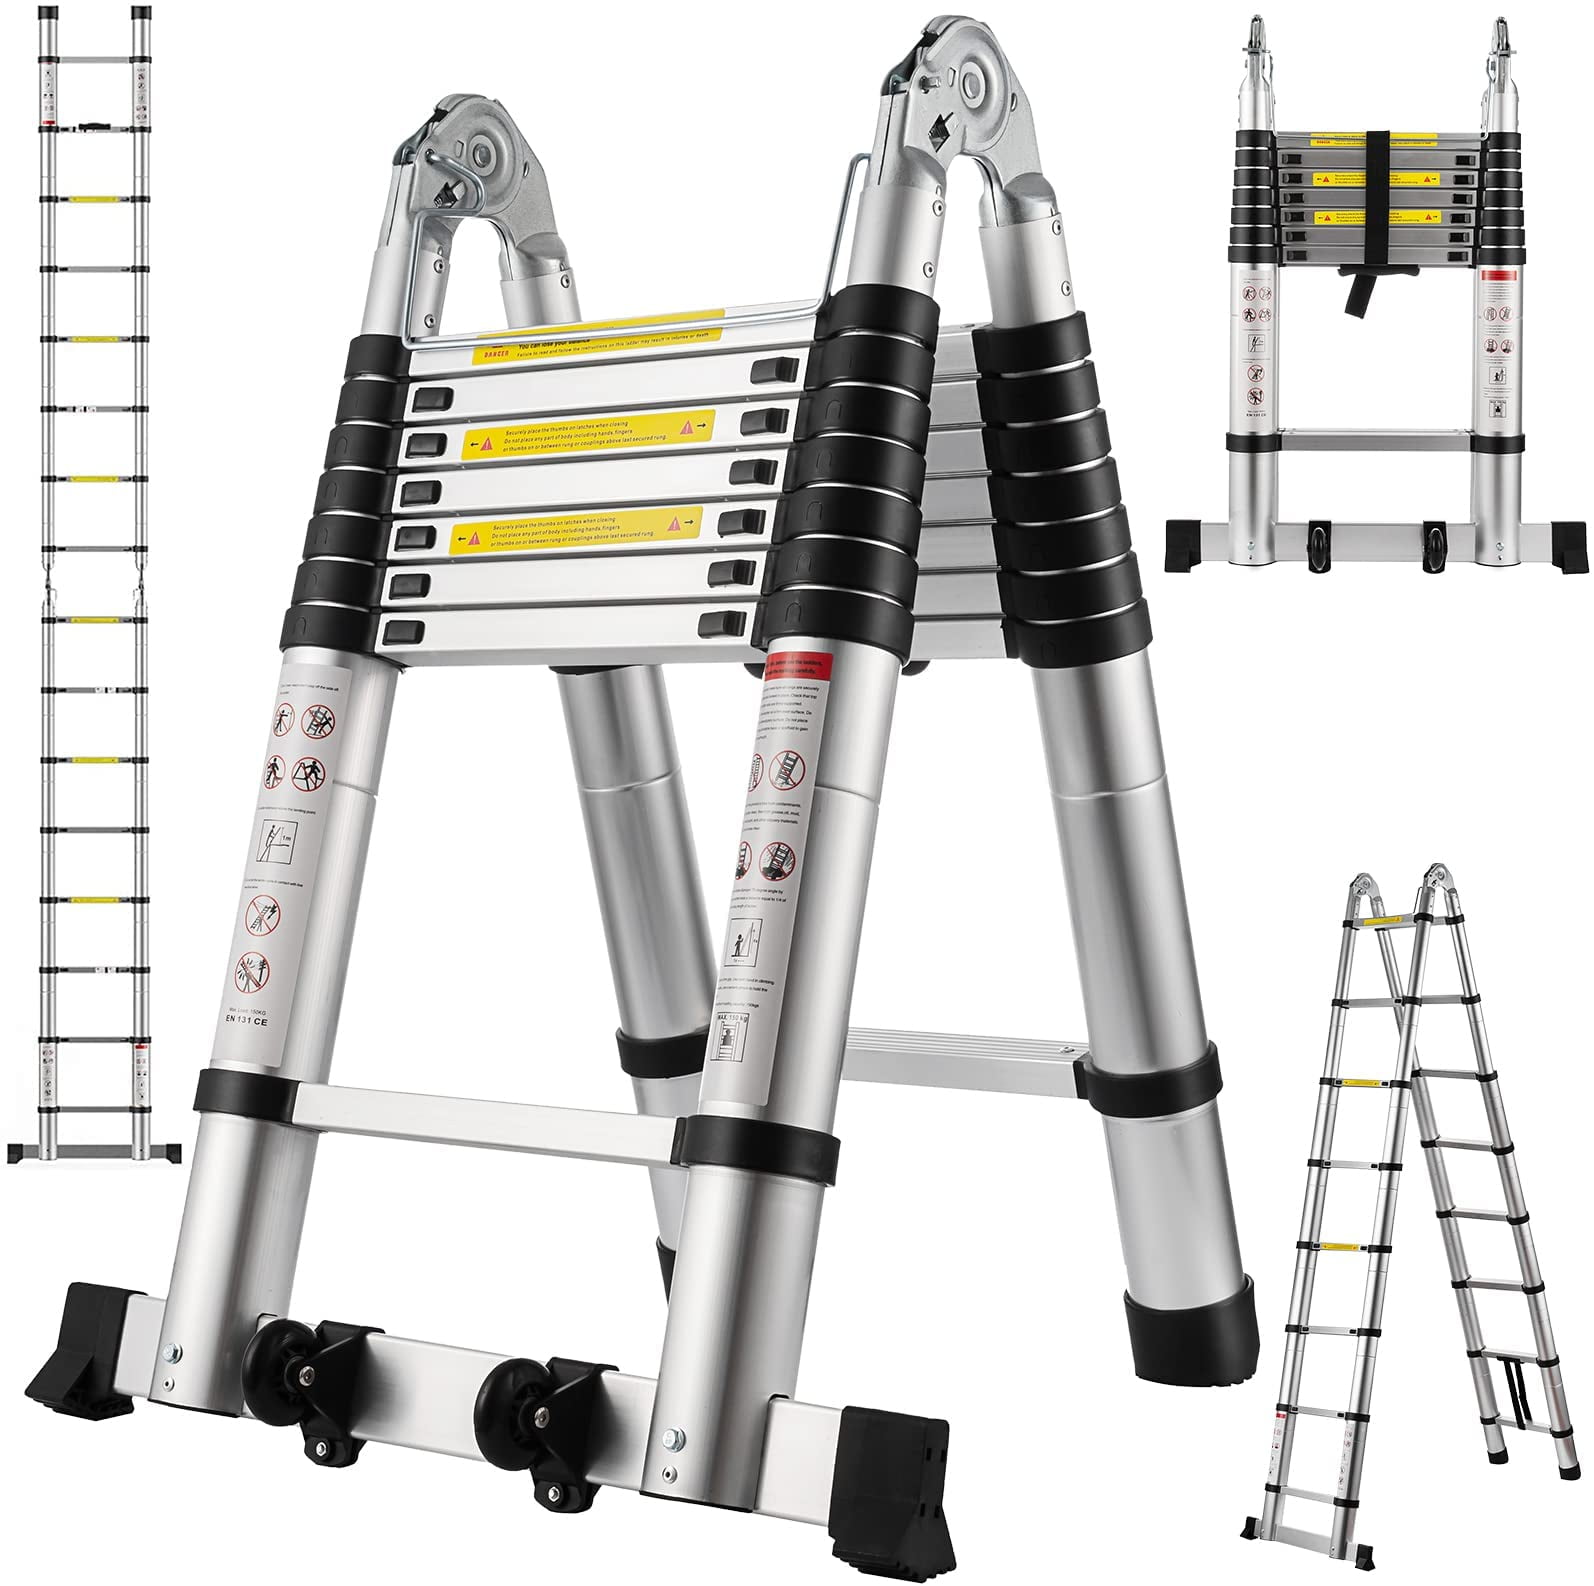 Aluminum Multi-Purpose Ladder Foldable Extendable Ladder 2 Rung Hold Up to 150kg 